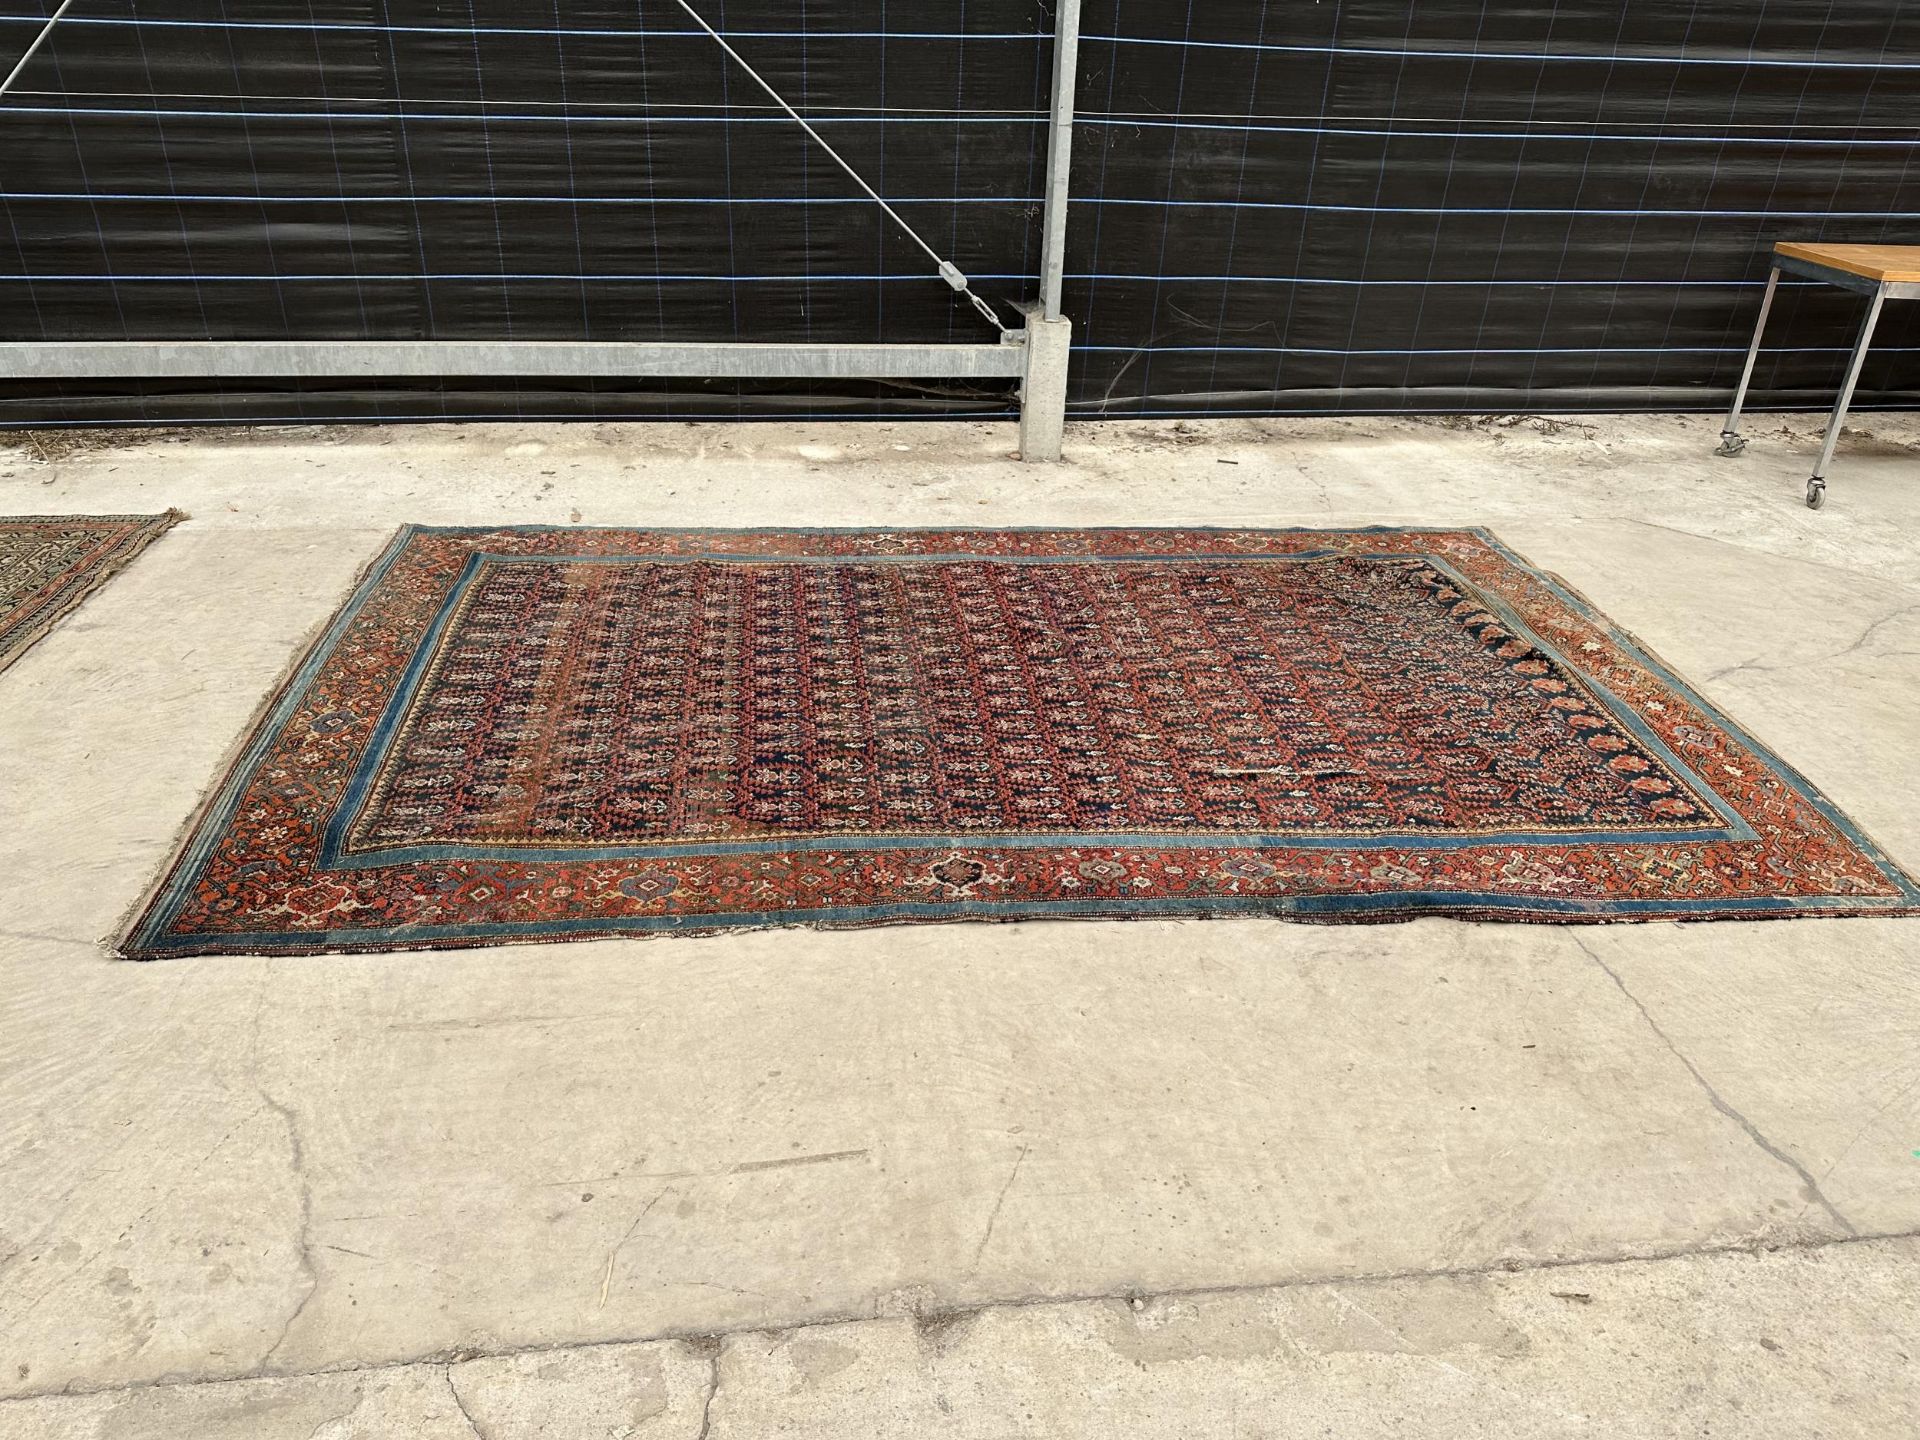 AN ANTIQUE, BELIEVED PERSIAN RUG 206 CM X 133 CM - HAS A TEAR, SEE PHOTOS 2 AND 6